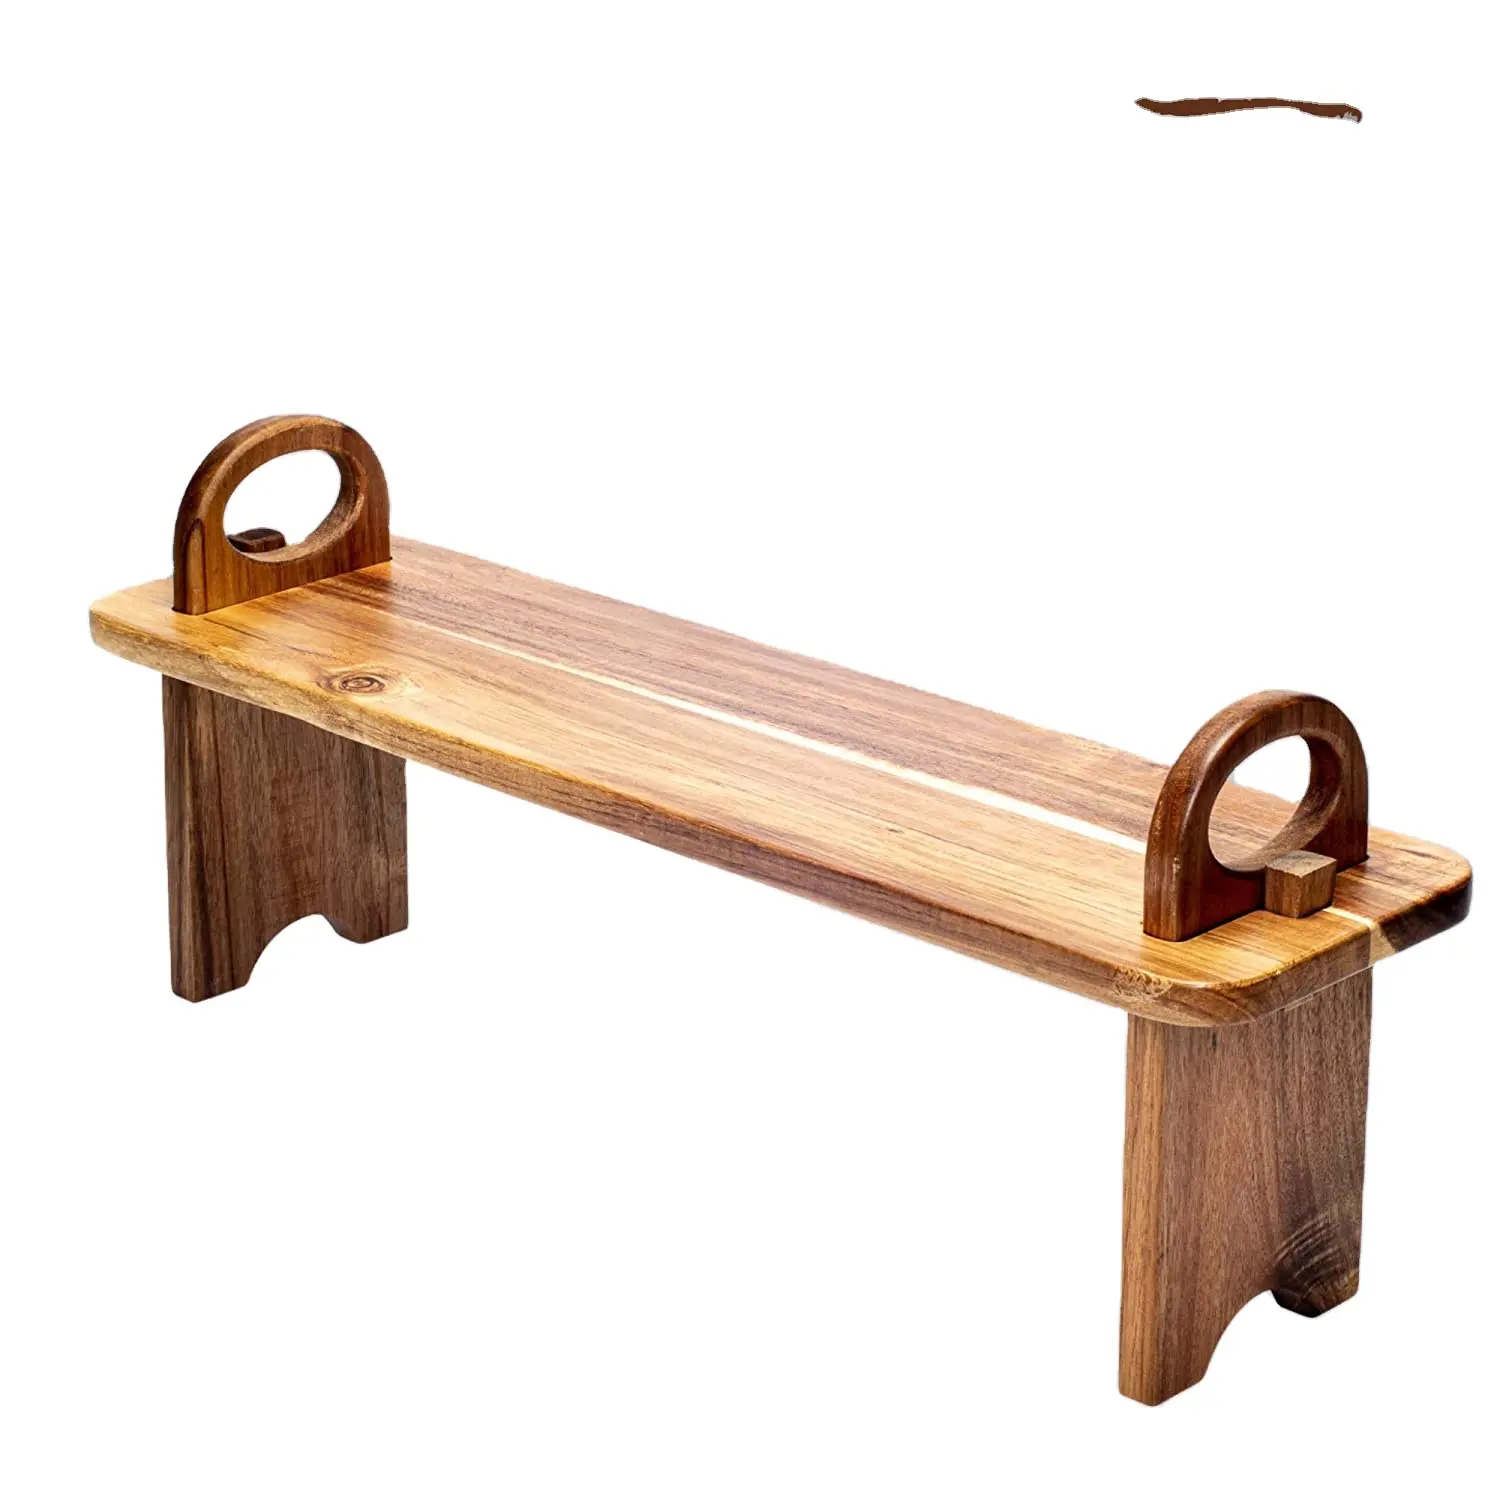 Acacia Wooden Serving Board on Stand Raised Wood Serving Trays Platter wooden food holder tray